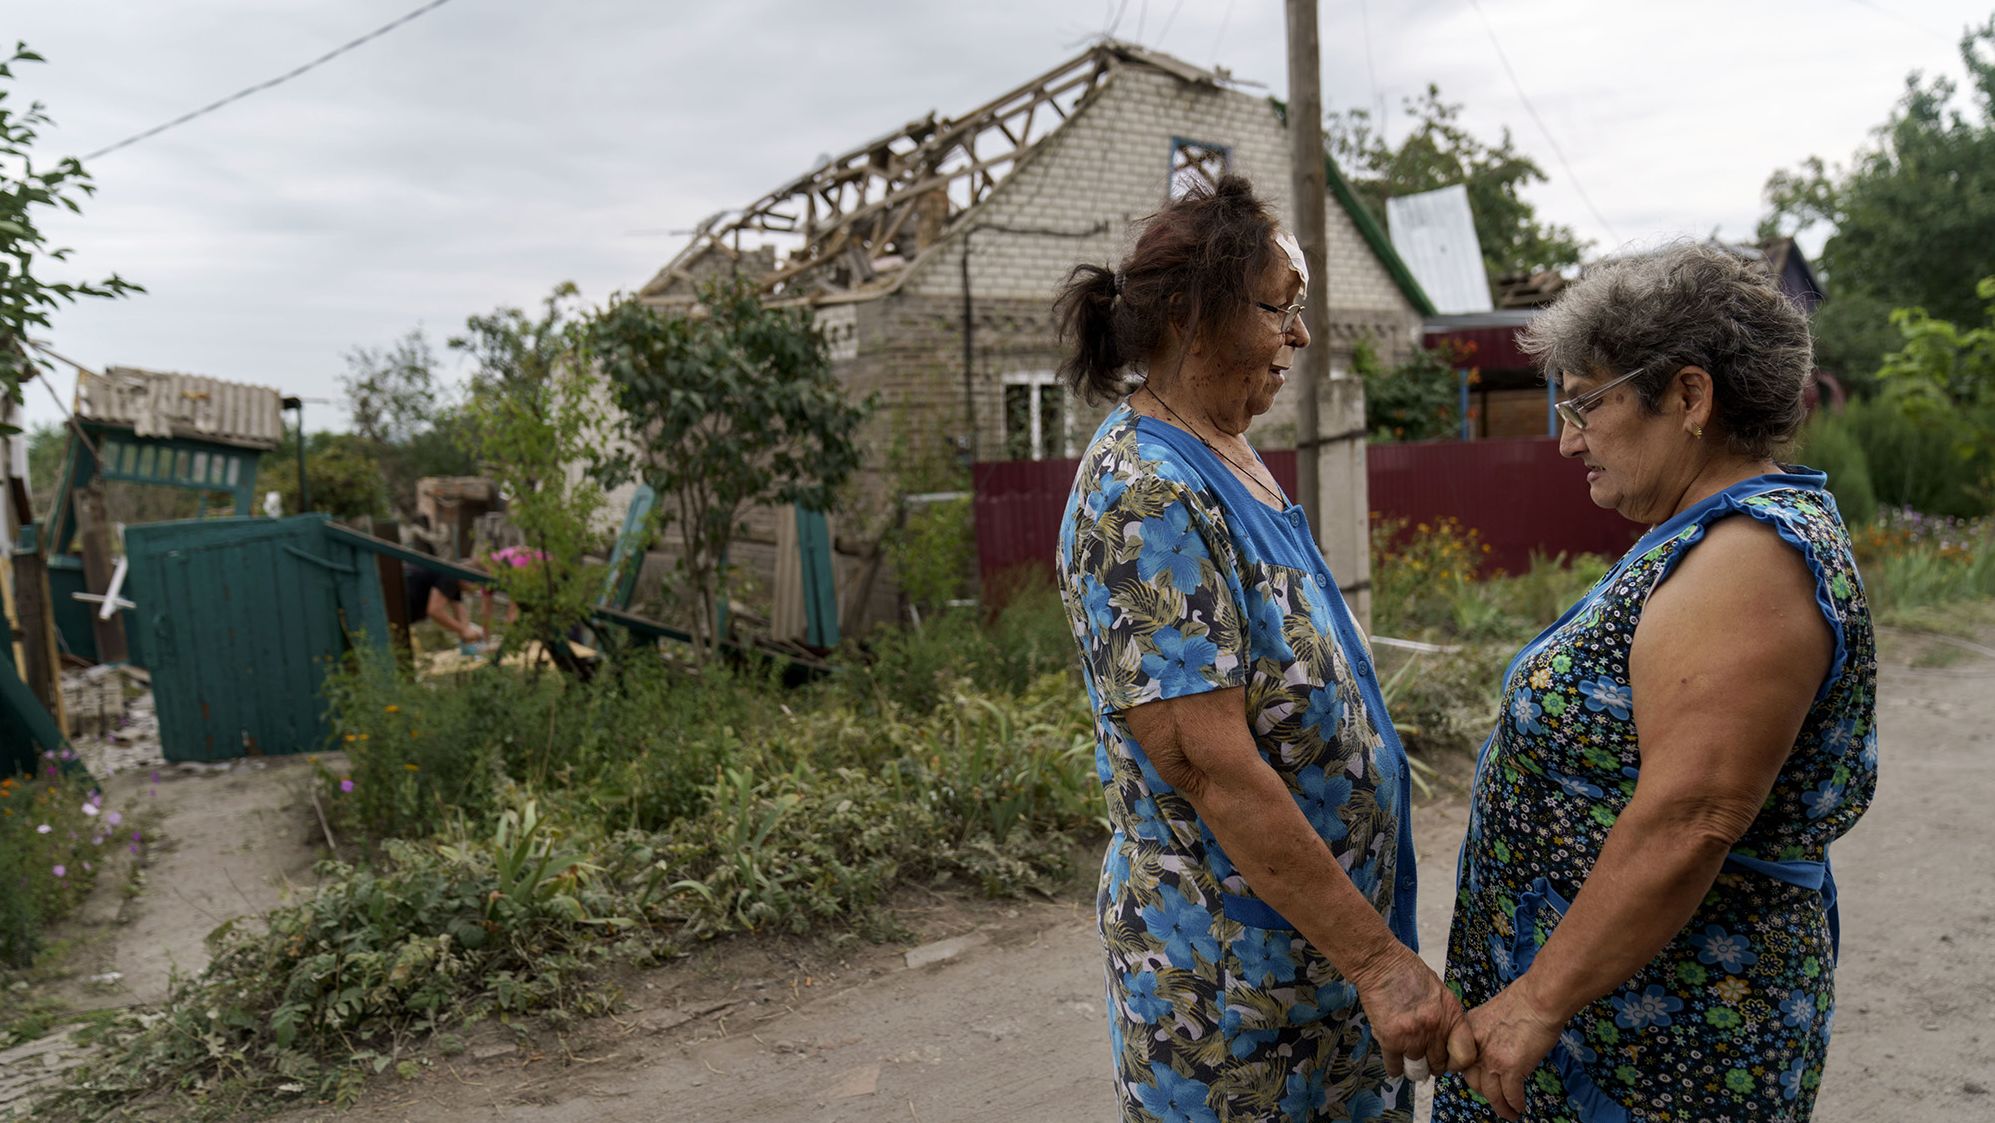 Valentyna Kondratieva, 75, left, is comforted by a neighbor as they stand outside her damaged home, in Kramatorsk, Ukraine, on August 13, after a rocket attack.